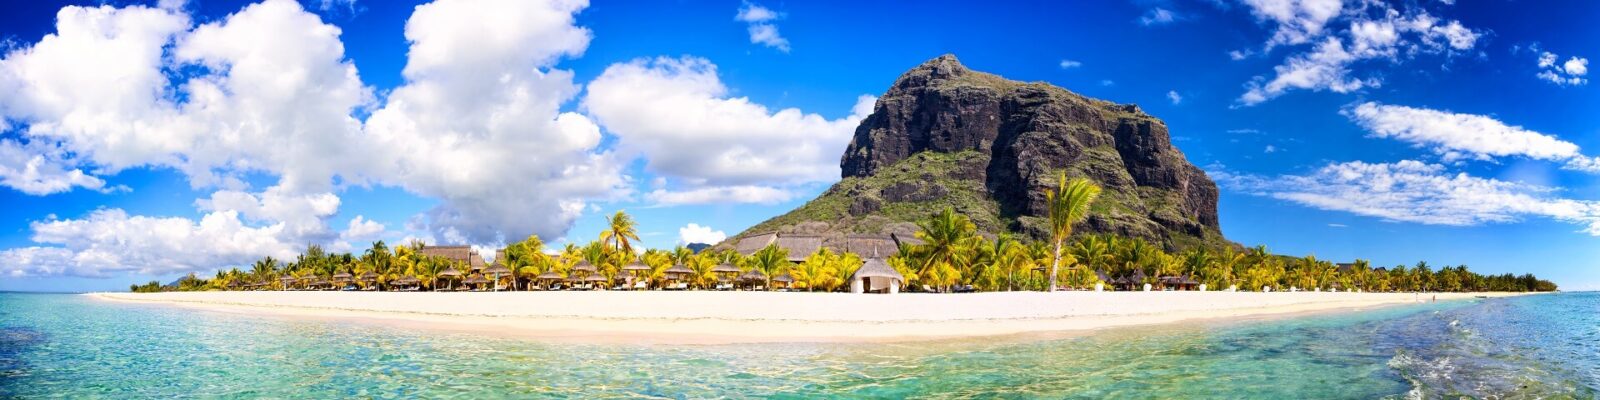 Andrea visits Club Med in Mauritius